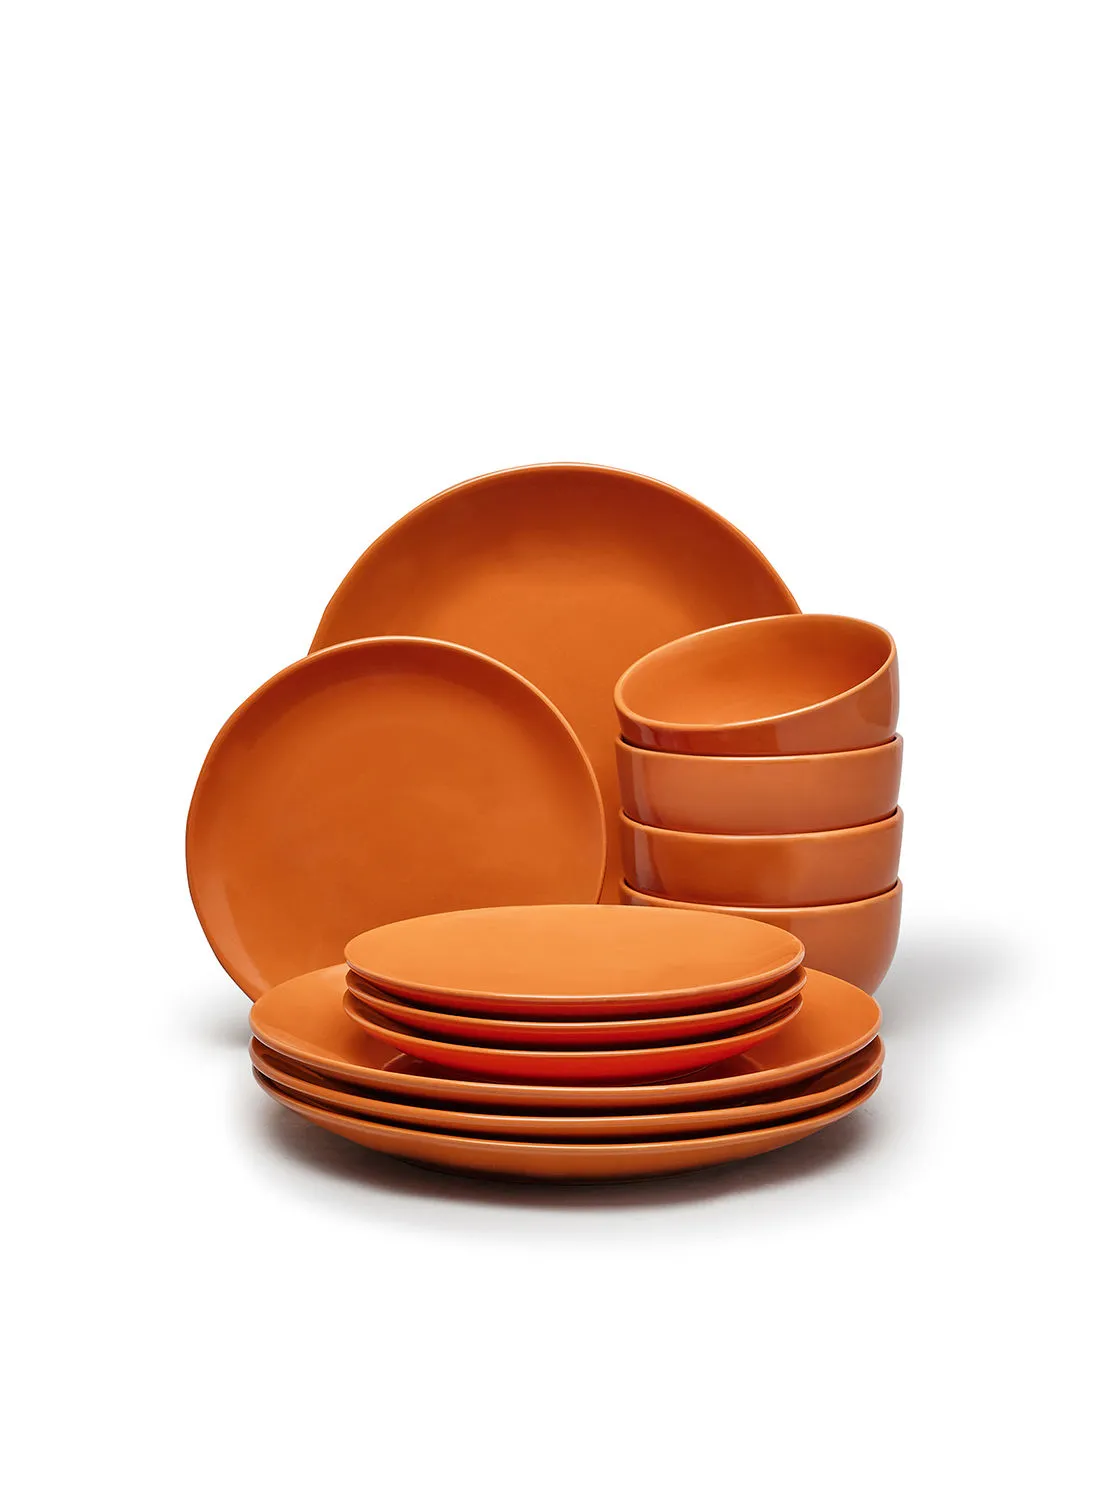 noon east 12 Piece Stoneware Dinner Set - Dishes, Plates - Dinner Plate, Side Plate, Bowl - Serves 4 - Rust